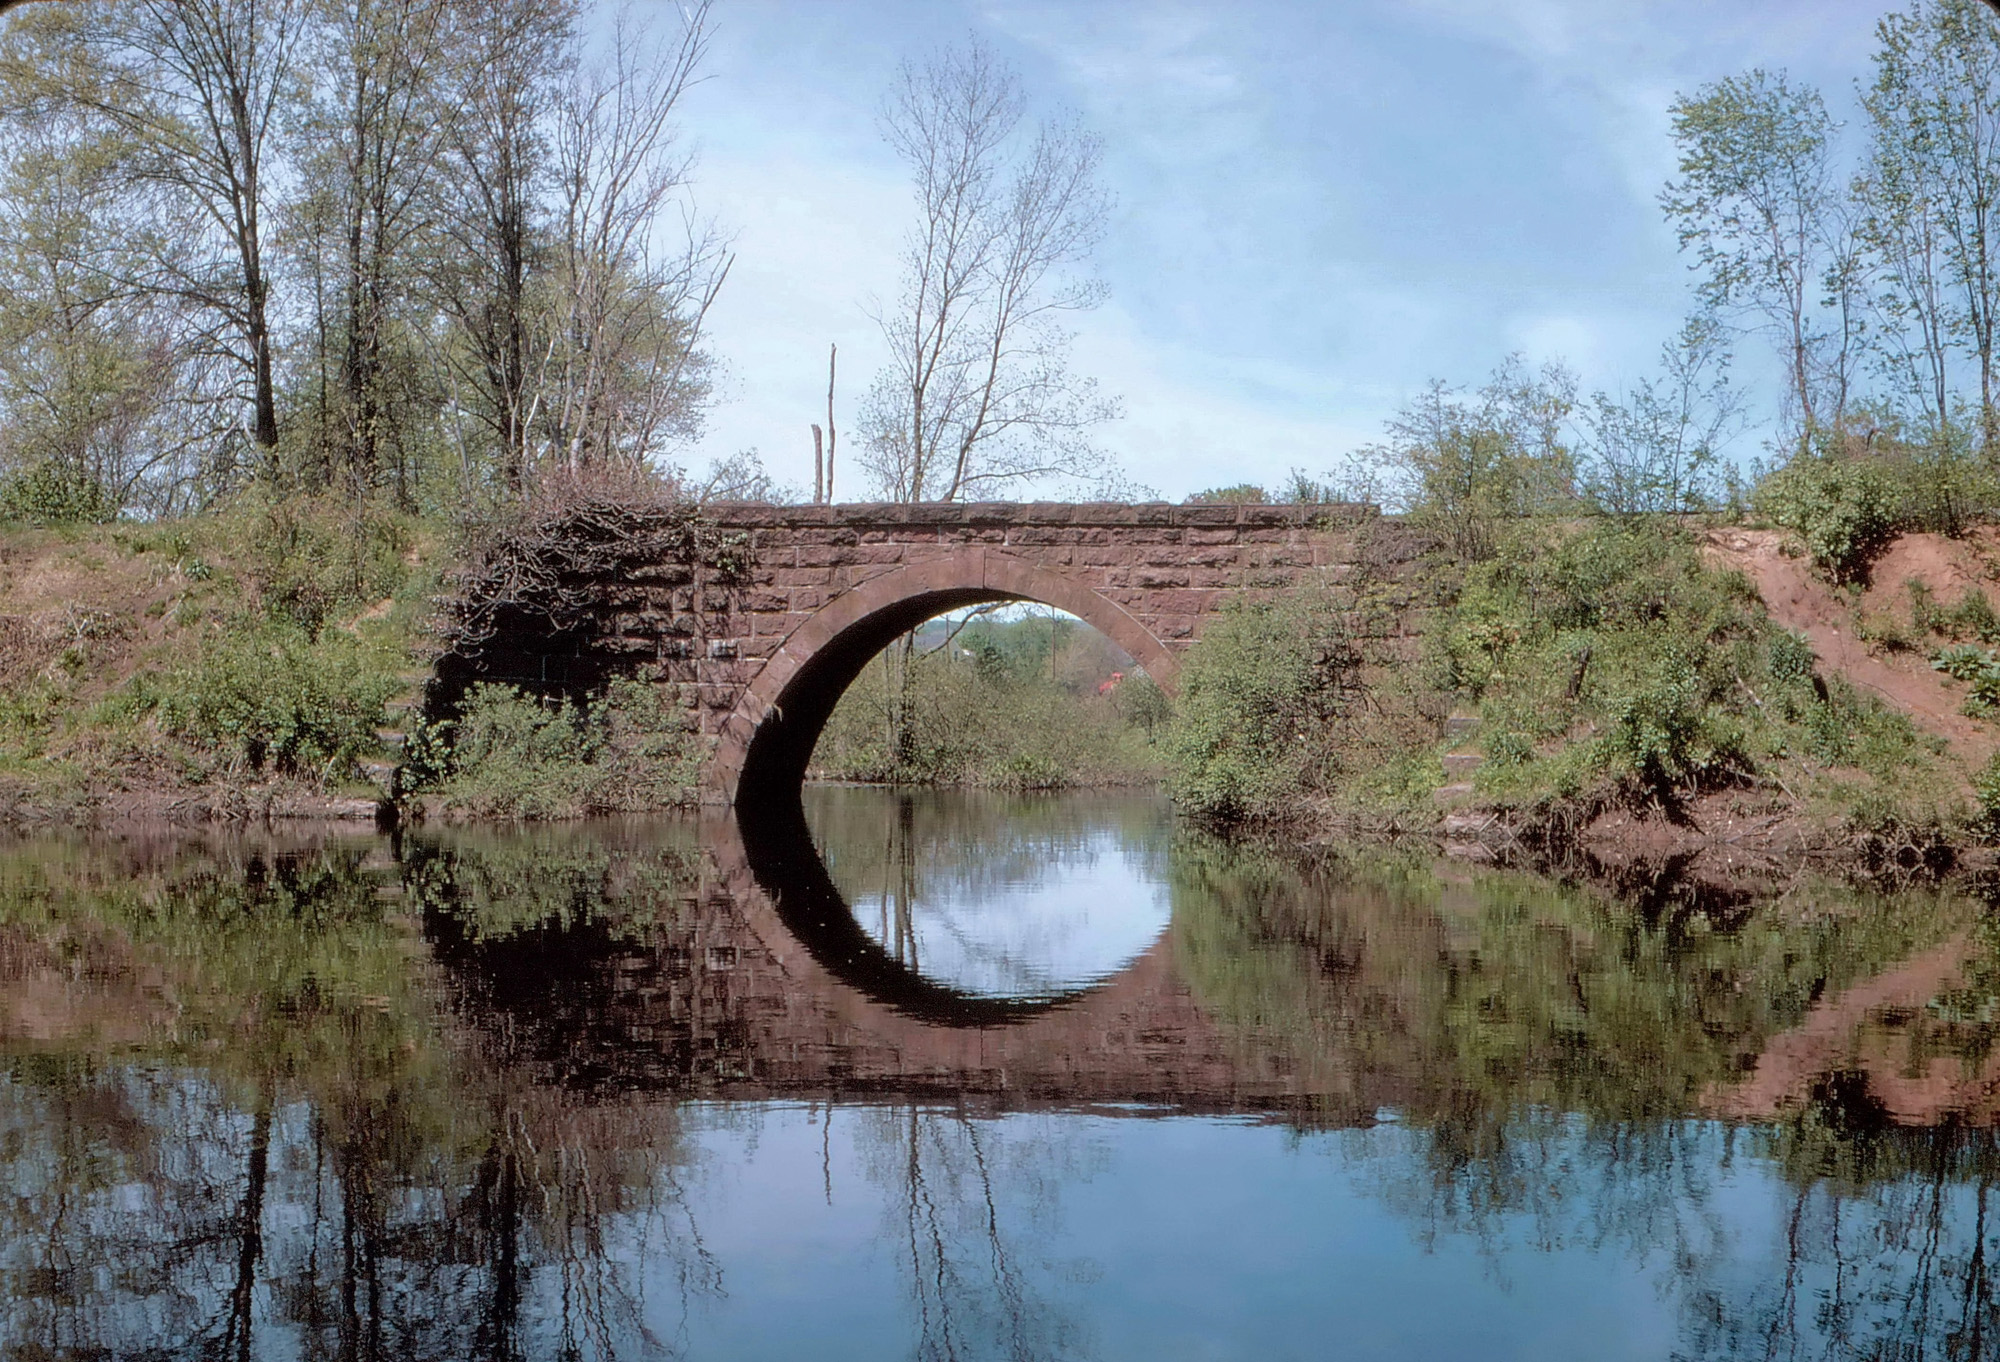 The "Canal Line" railroad, so-called, was constructed in 1847-8 from New Haven, Connecticut to Northampton, Massachusetts to replace the failed Farmington (later New Haven - Northampton) Canal, running over roughly the same course as the canal. The brownstone arch spans the Tenmile River in Cheshire, Connecticut.  In 1987 Interstate 691 was built though this site and the bridge was replaced with a modern banality. Numerous railroads have owned the old line over the years and all rail traffic on this part of the line ceased very soon after its replacement. A rail-trail extension through this area is expected. I took this picture on June 4, 1967 when I was 16. Kodachrome, of course! View full size.